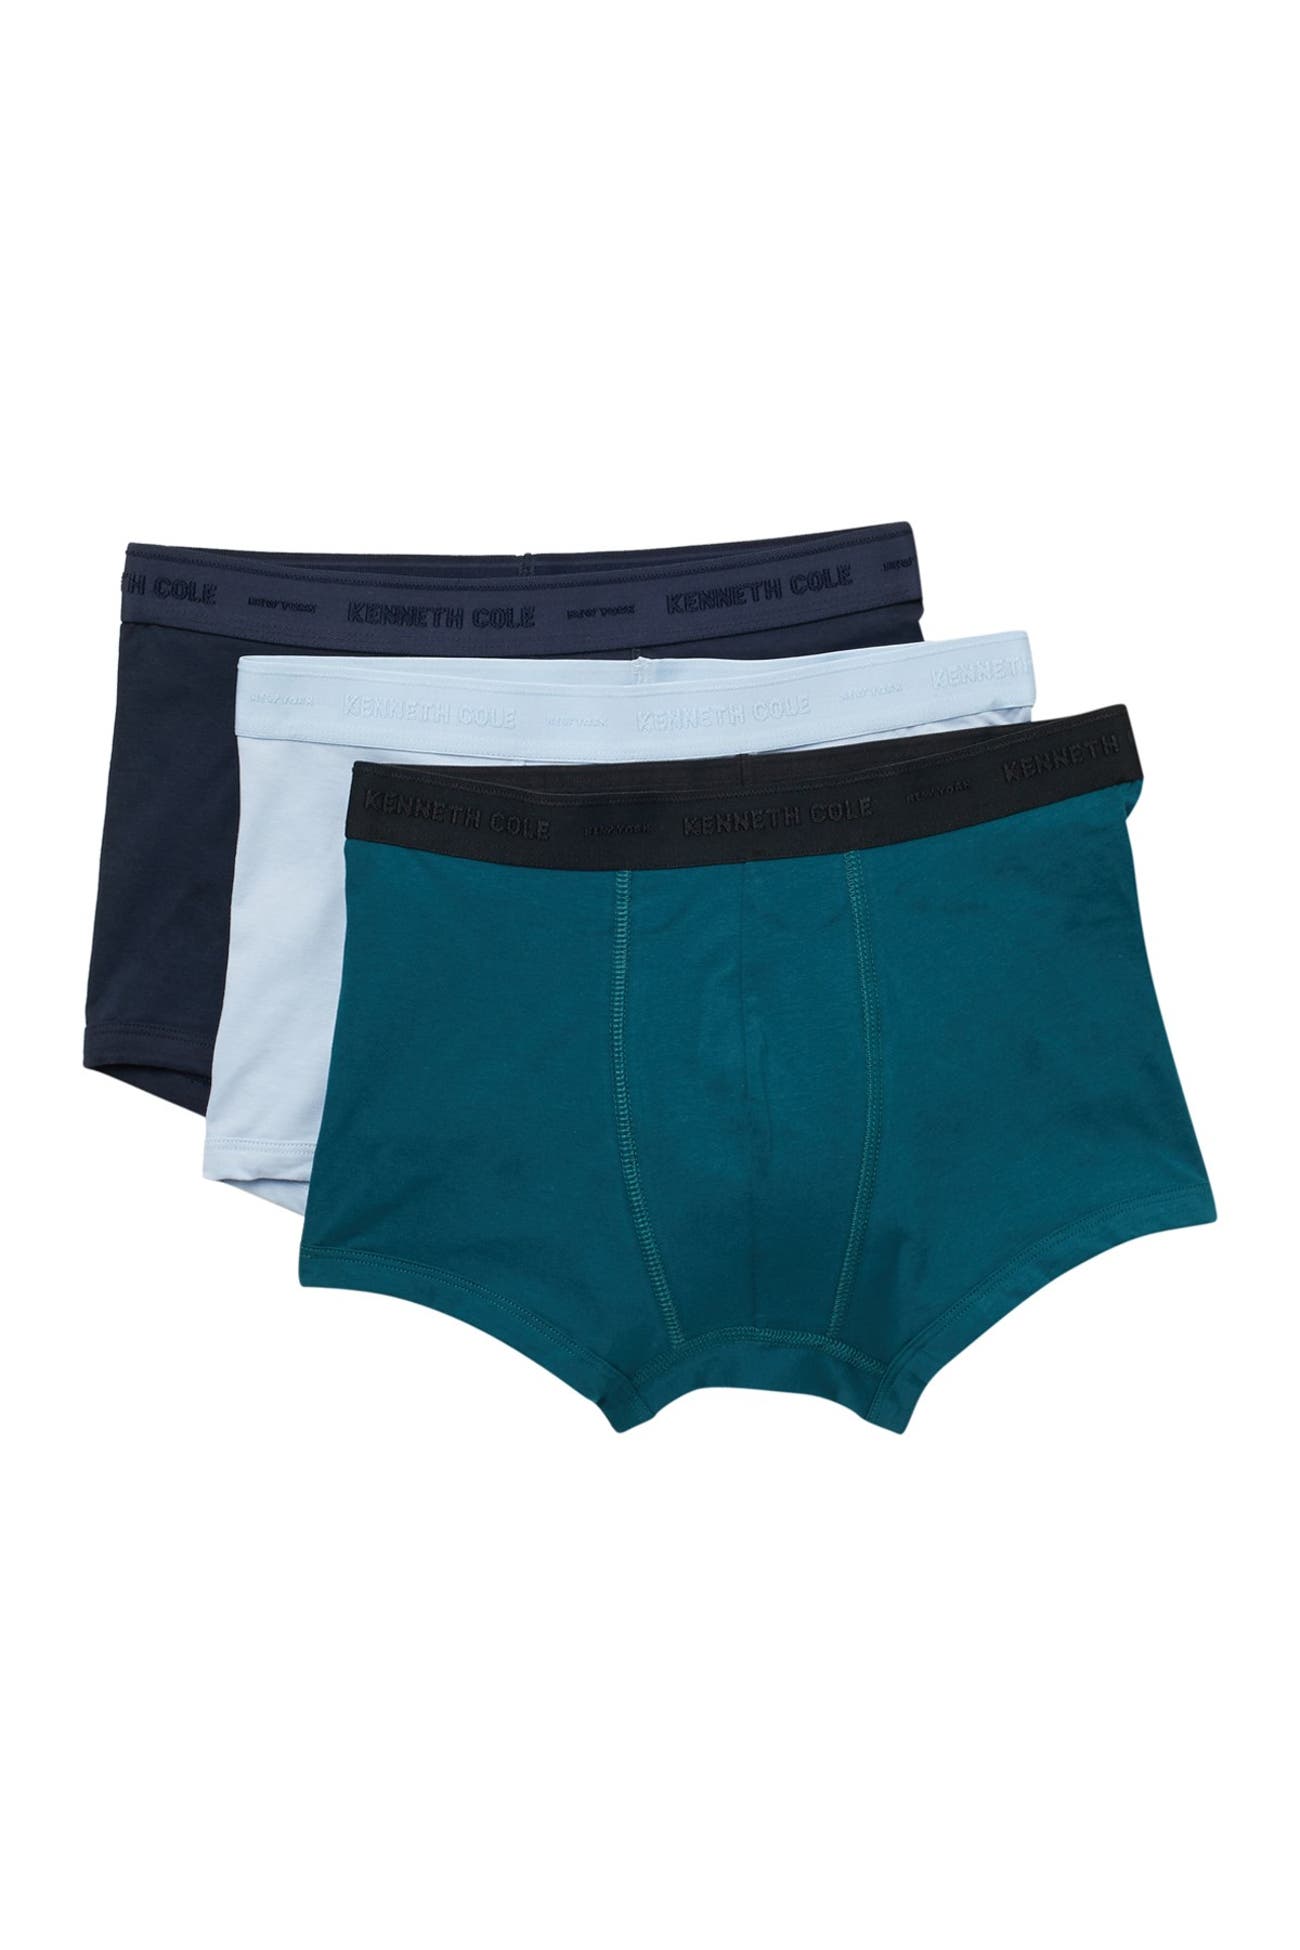 KENNETH COLE | Cotton Stretch Trunks - Pack of 3 | Nordstrom Rack